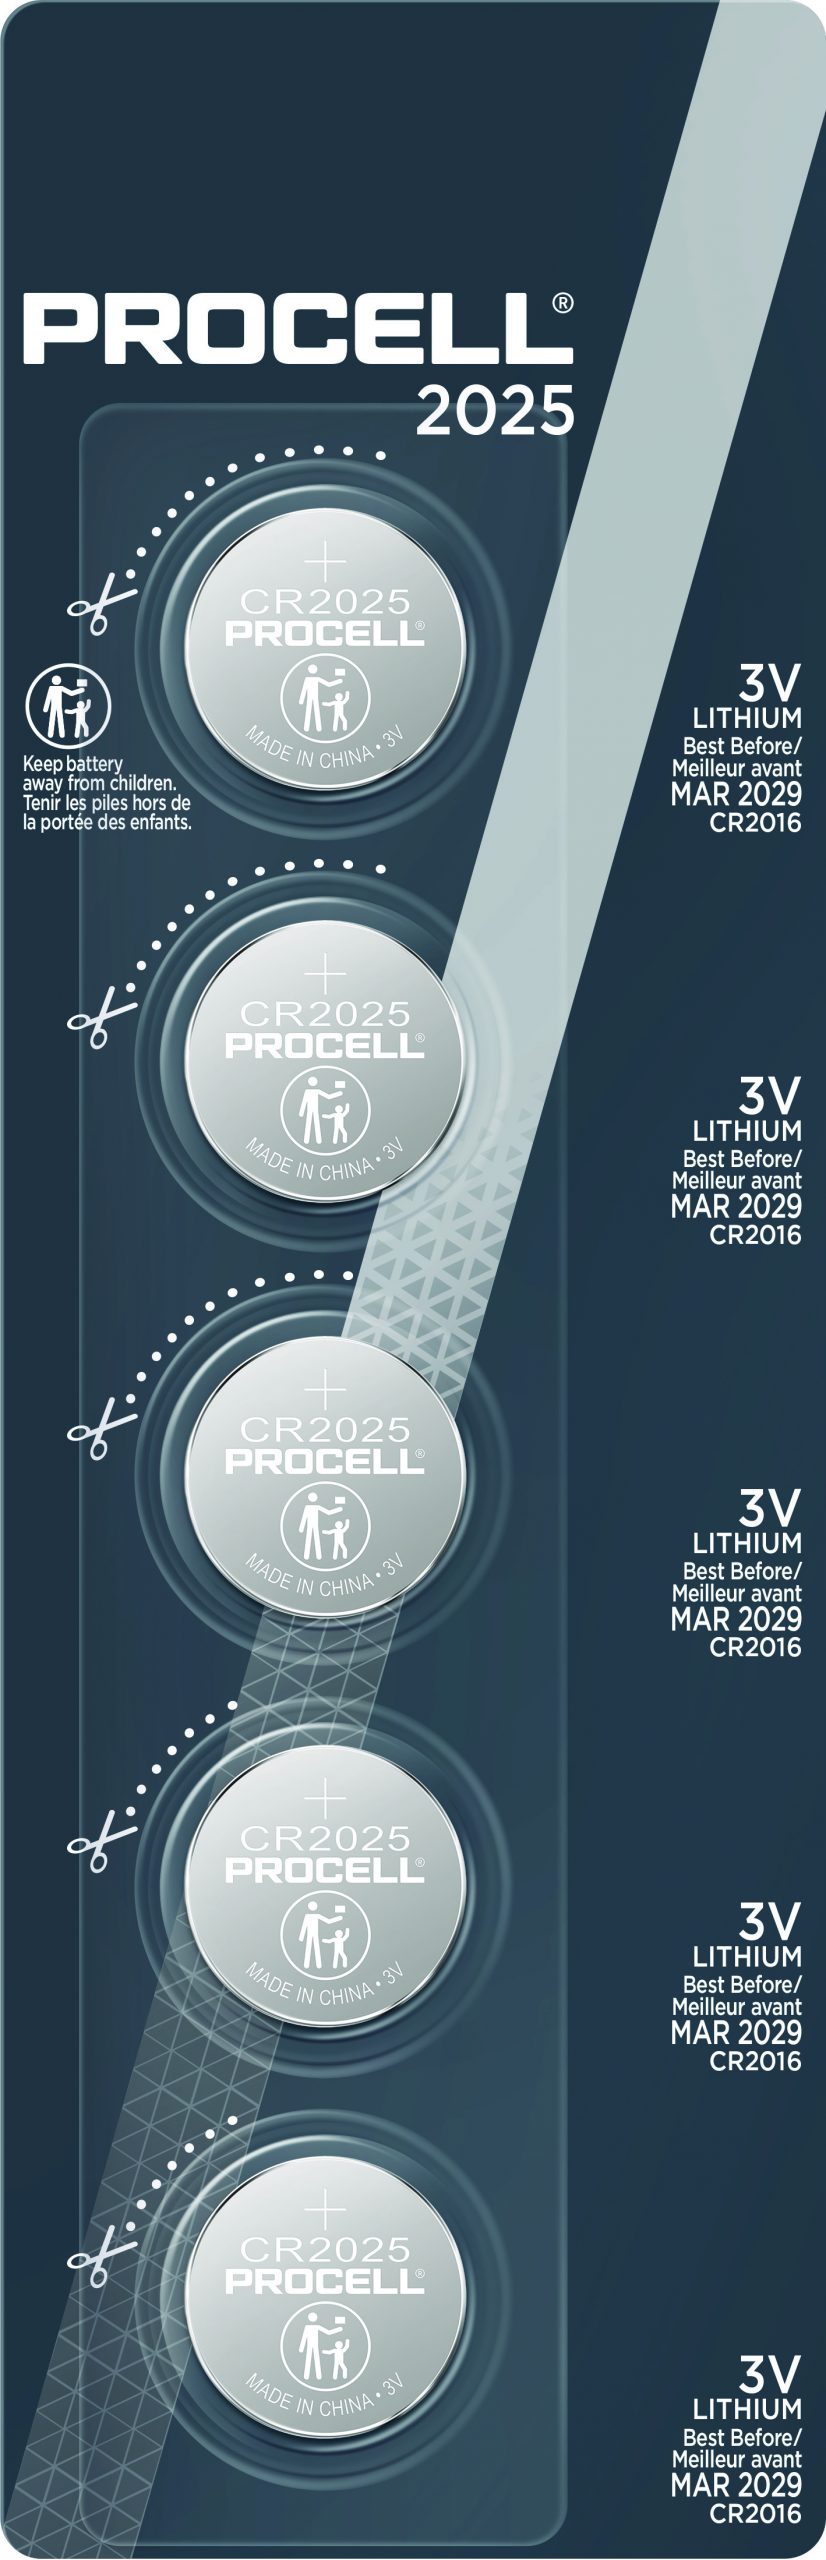 Procell_Coin_2025_Tear_Pack_Base.psd_JPG_High-Res_300dpi_-scaled-1.jpeg